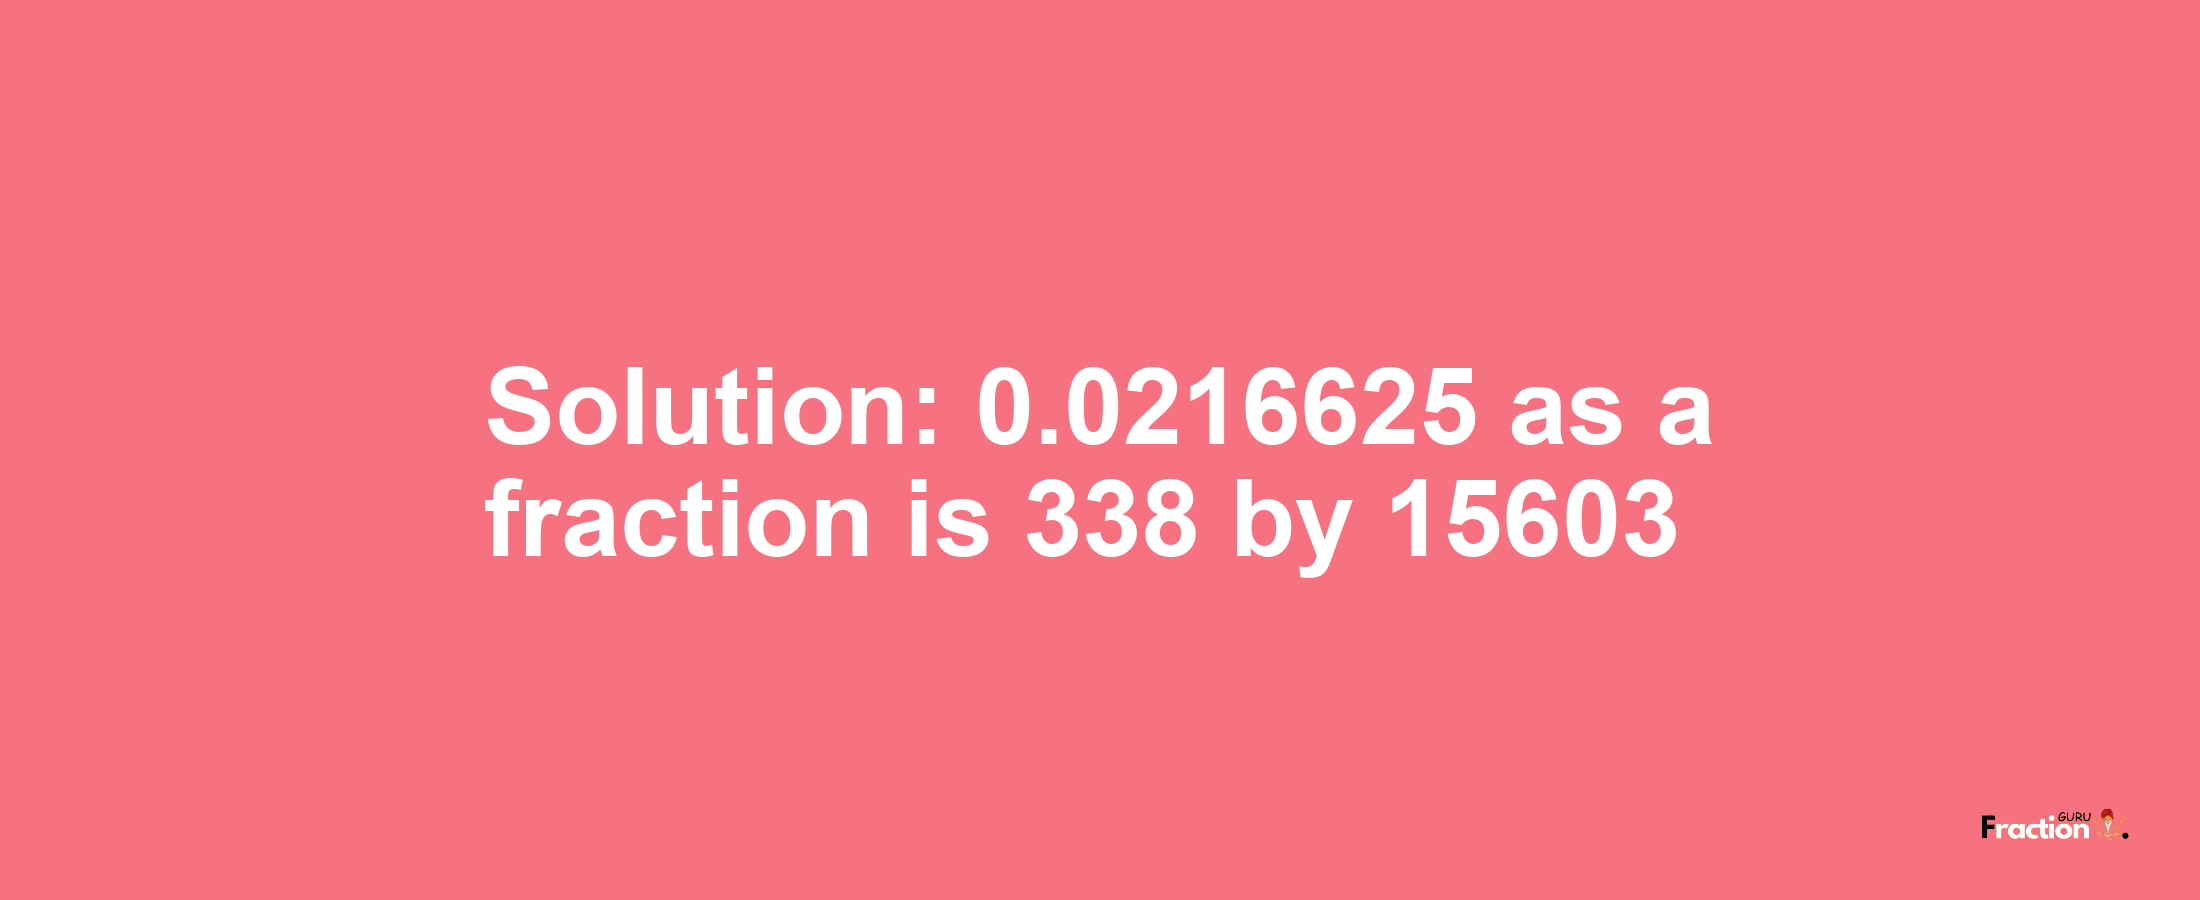 Solution:0.0216625 as a fraction is 338/15603